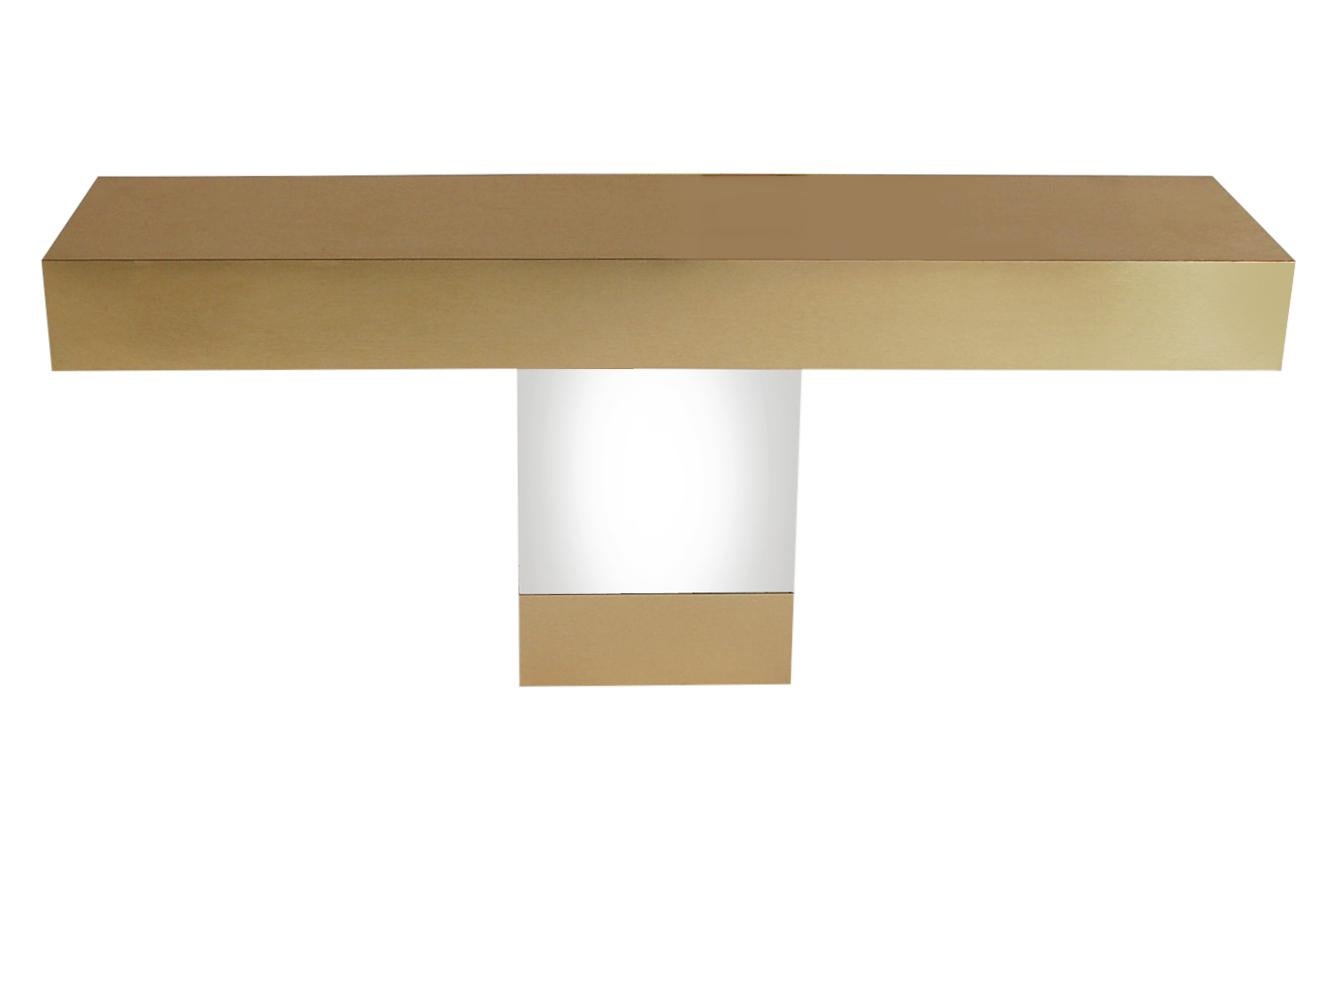 American Mid-Century Modern Brass & Mirror Wall-Mounted Floating Console after Paul Evans